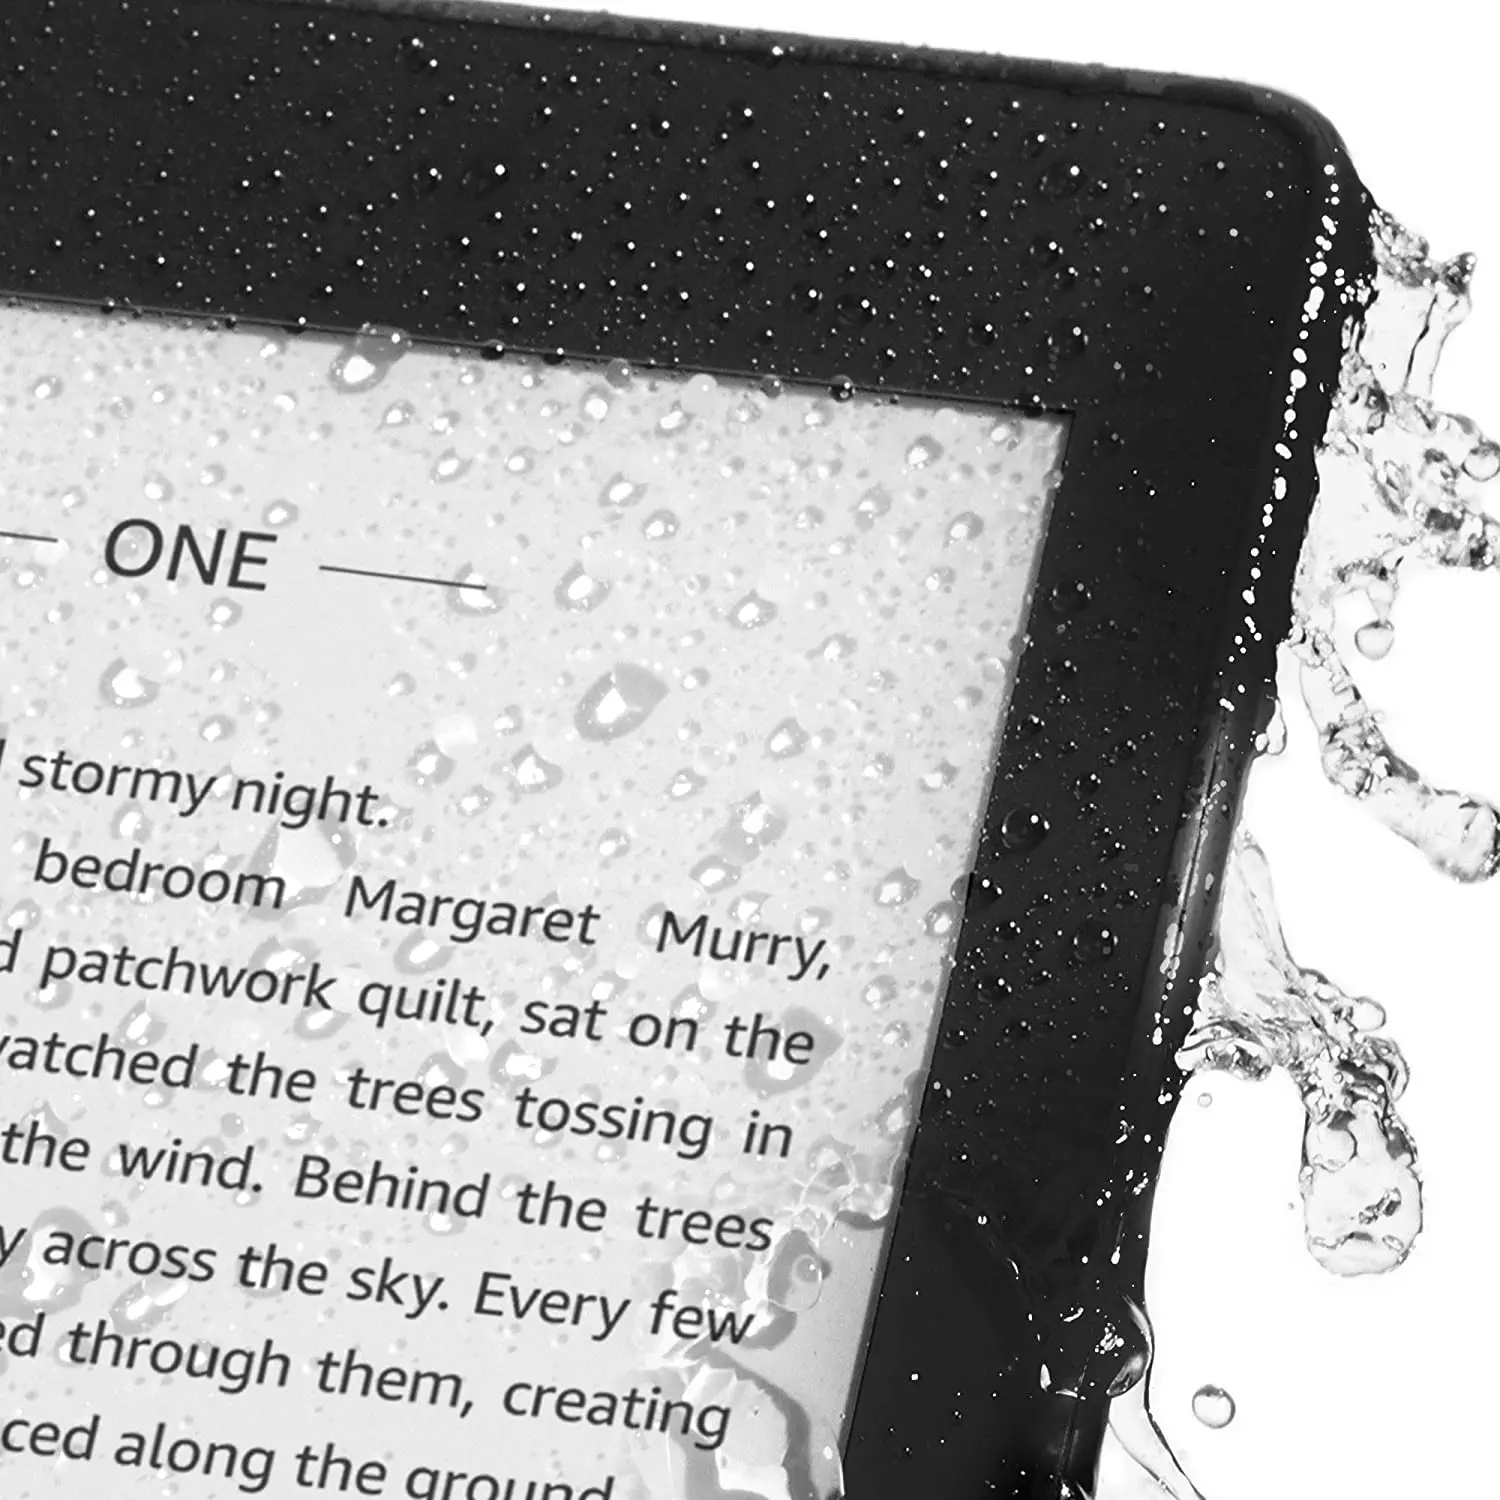 The Awesome Kindle Paperwhite